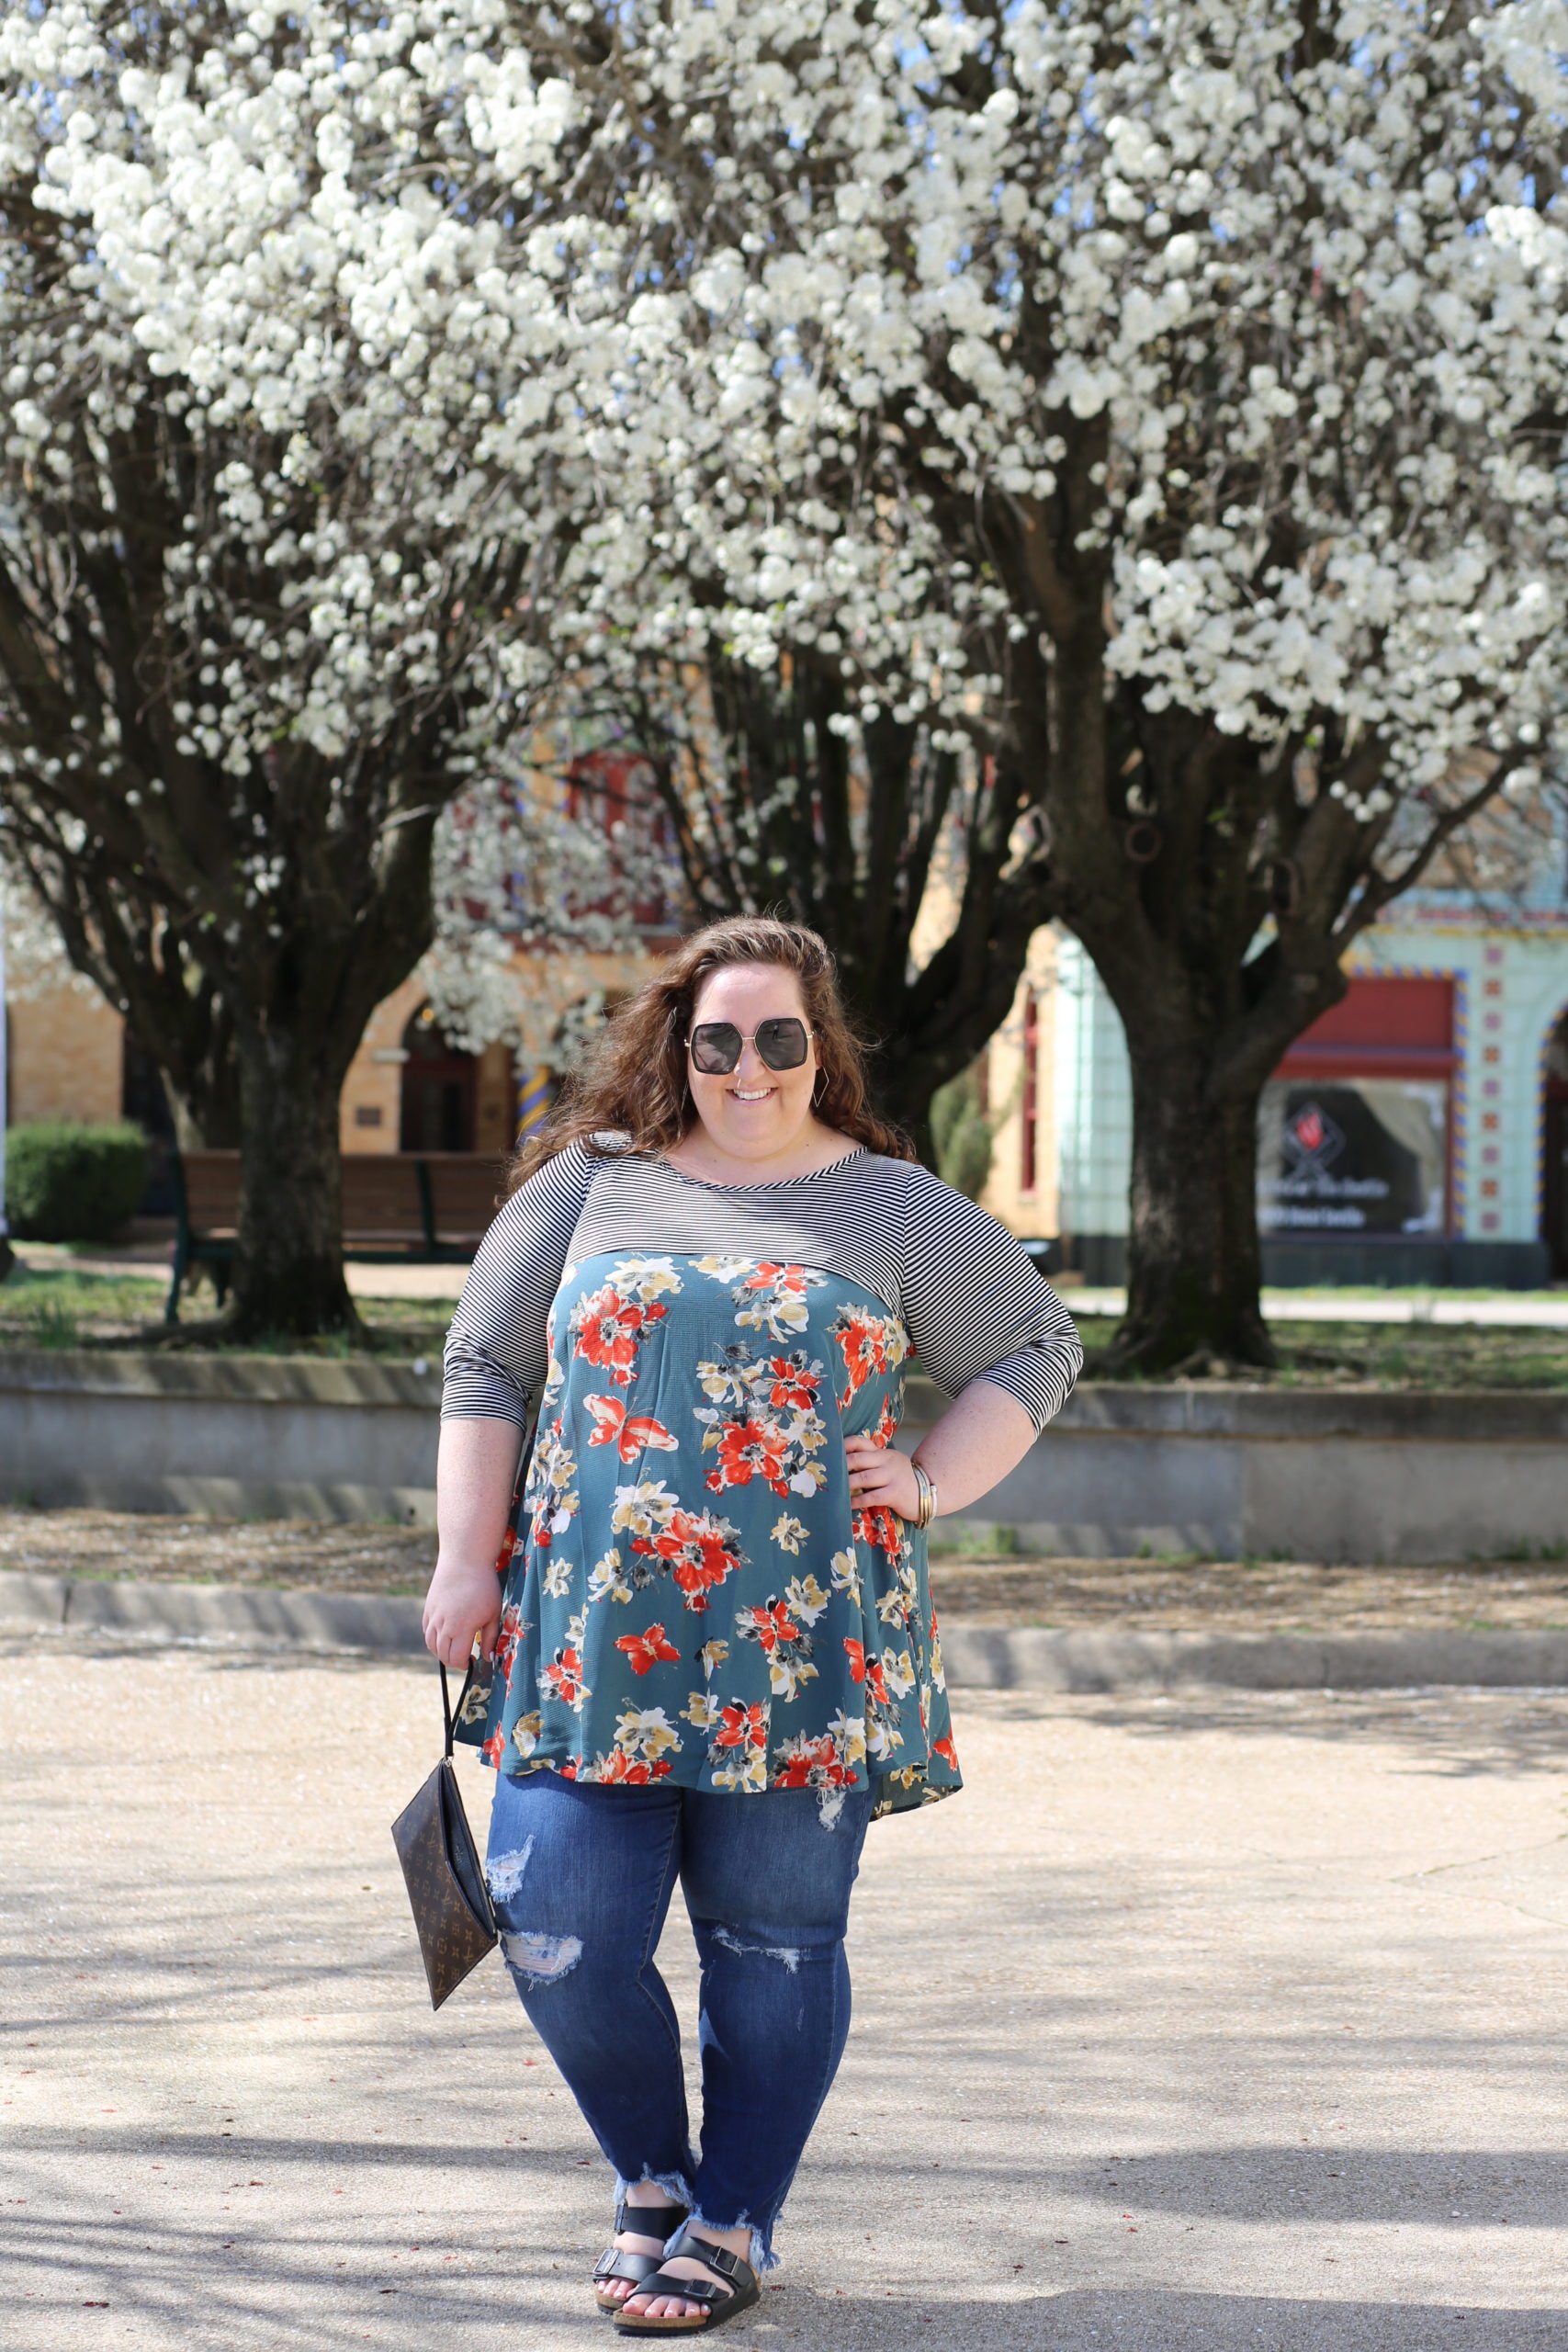 curvy boutique, the wandering willow, rebekaheliz, rebekahelizstyle, curvy style, plus size style, plus size blogger, spring style